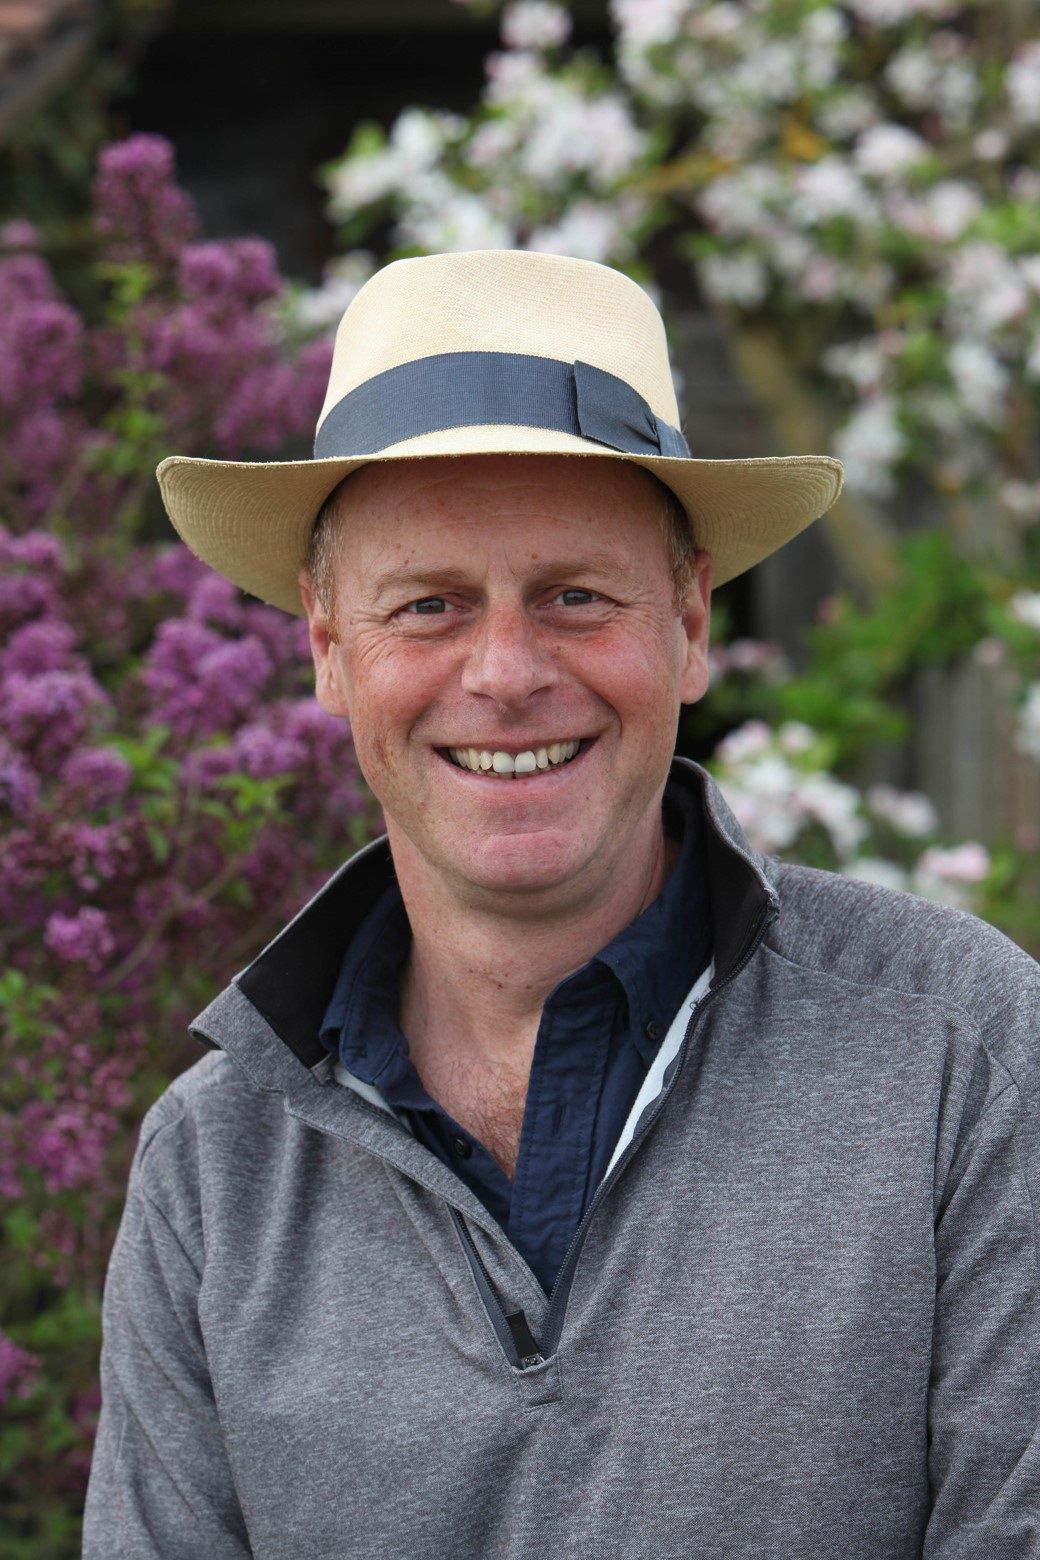 Interview Gardener Joe Swift Speaks To Country Living About His Life